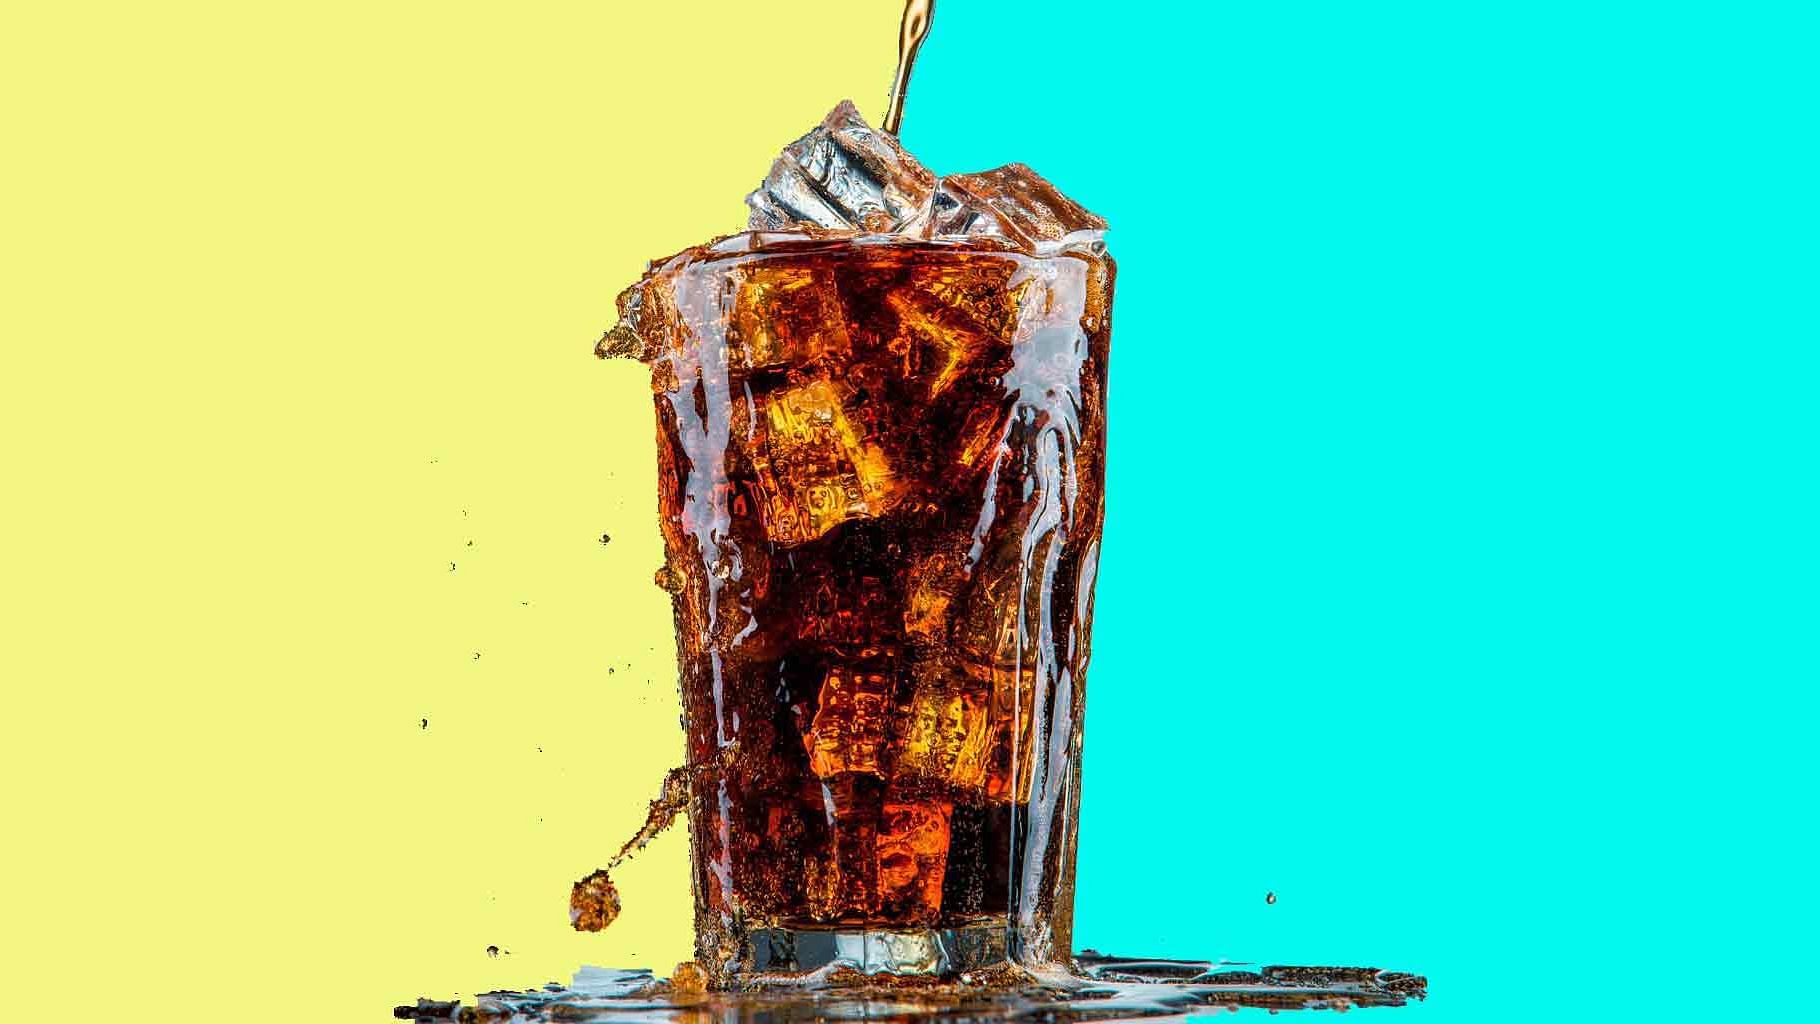 People who drink lots of sugar-sweetened drinks may be putting themselves at a greater risk of cardiovascular diseases, according to a study.